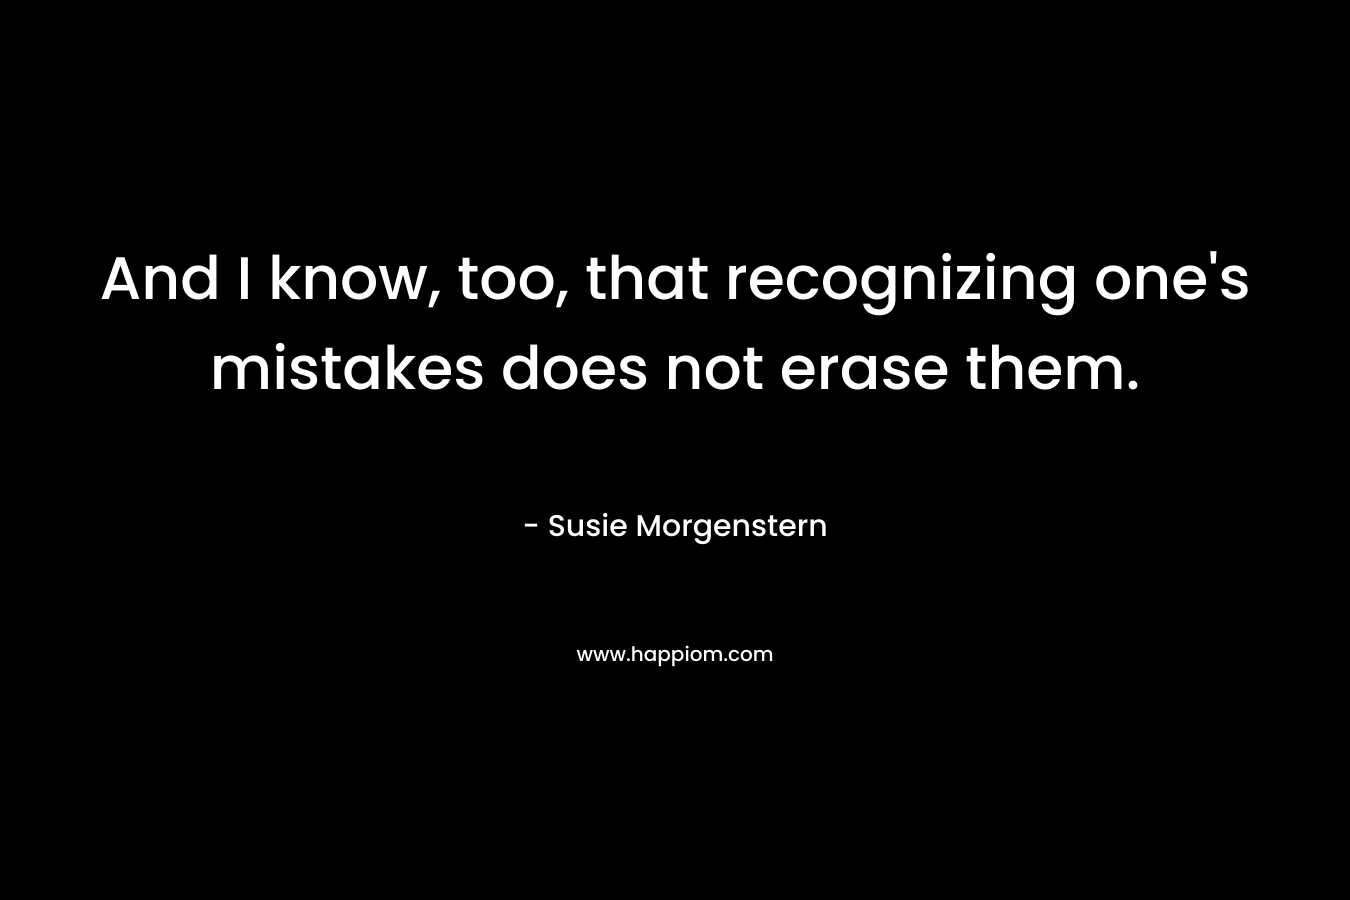 And I know, too, that recognizing one’s mistakes does not erase them. – Susie Morgenstern